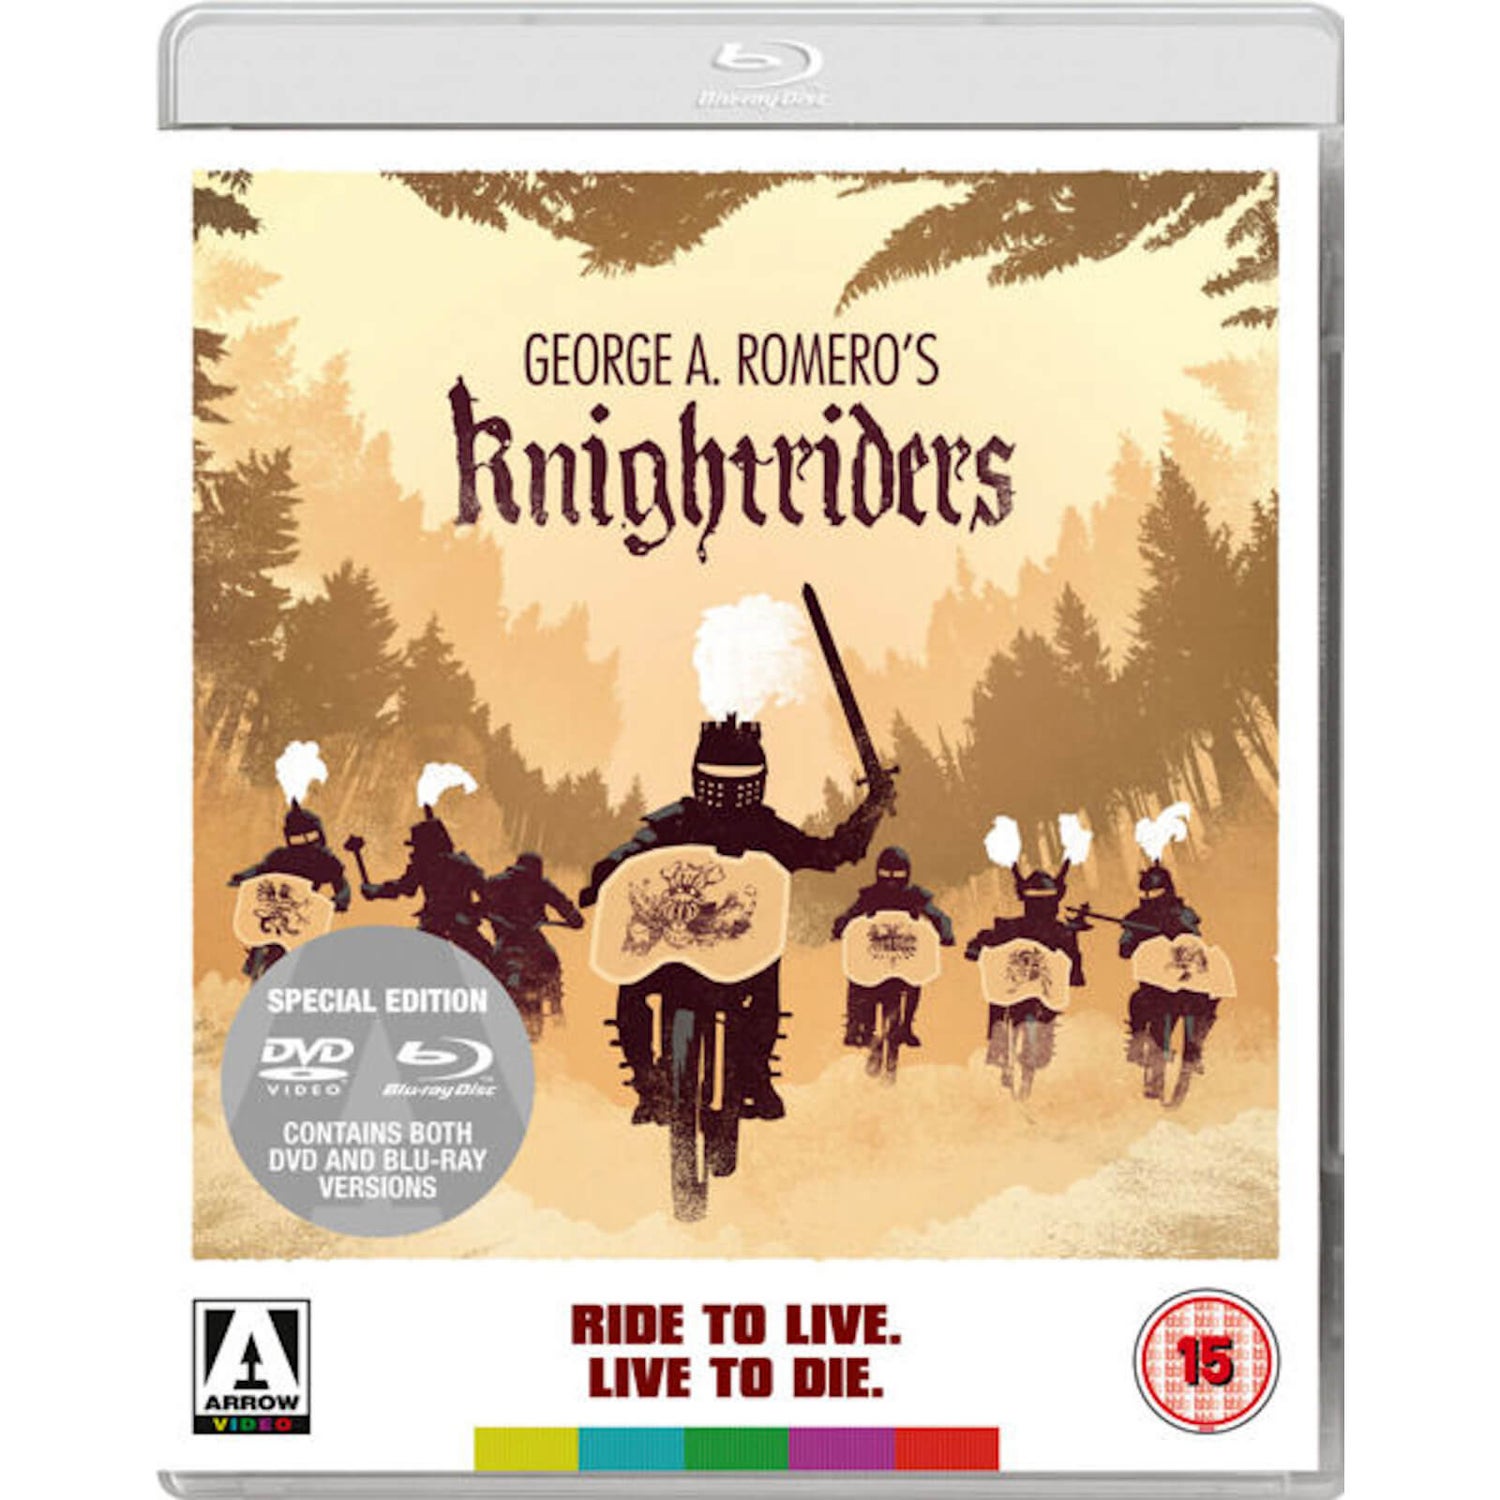 Knightriders (Includes DVD)